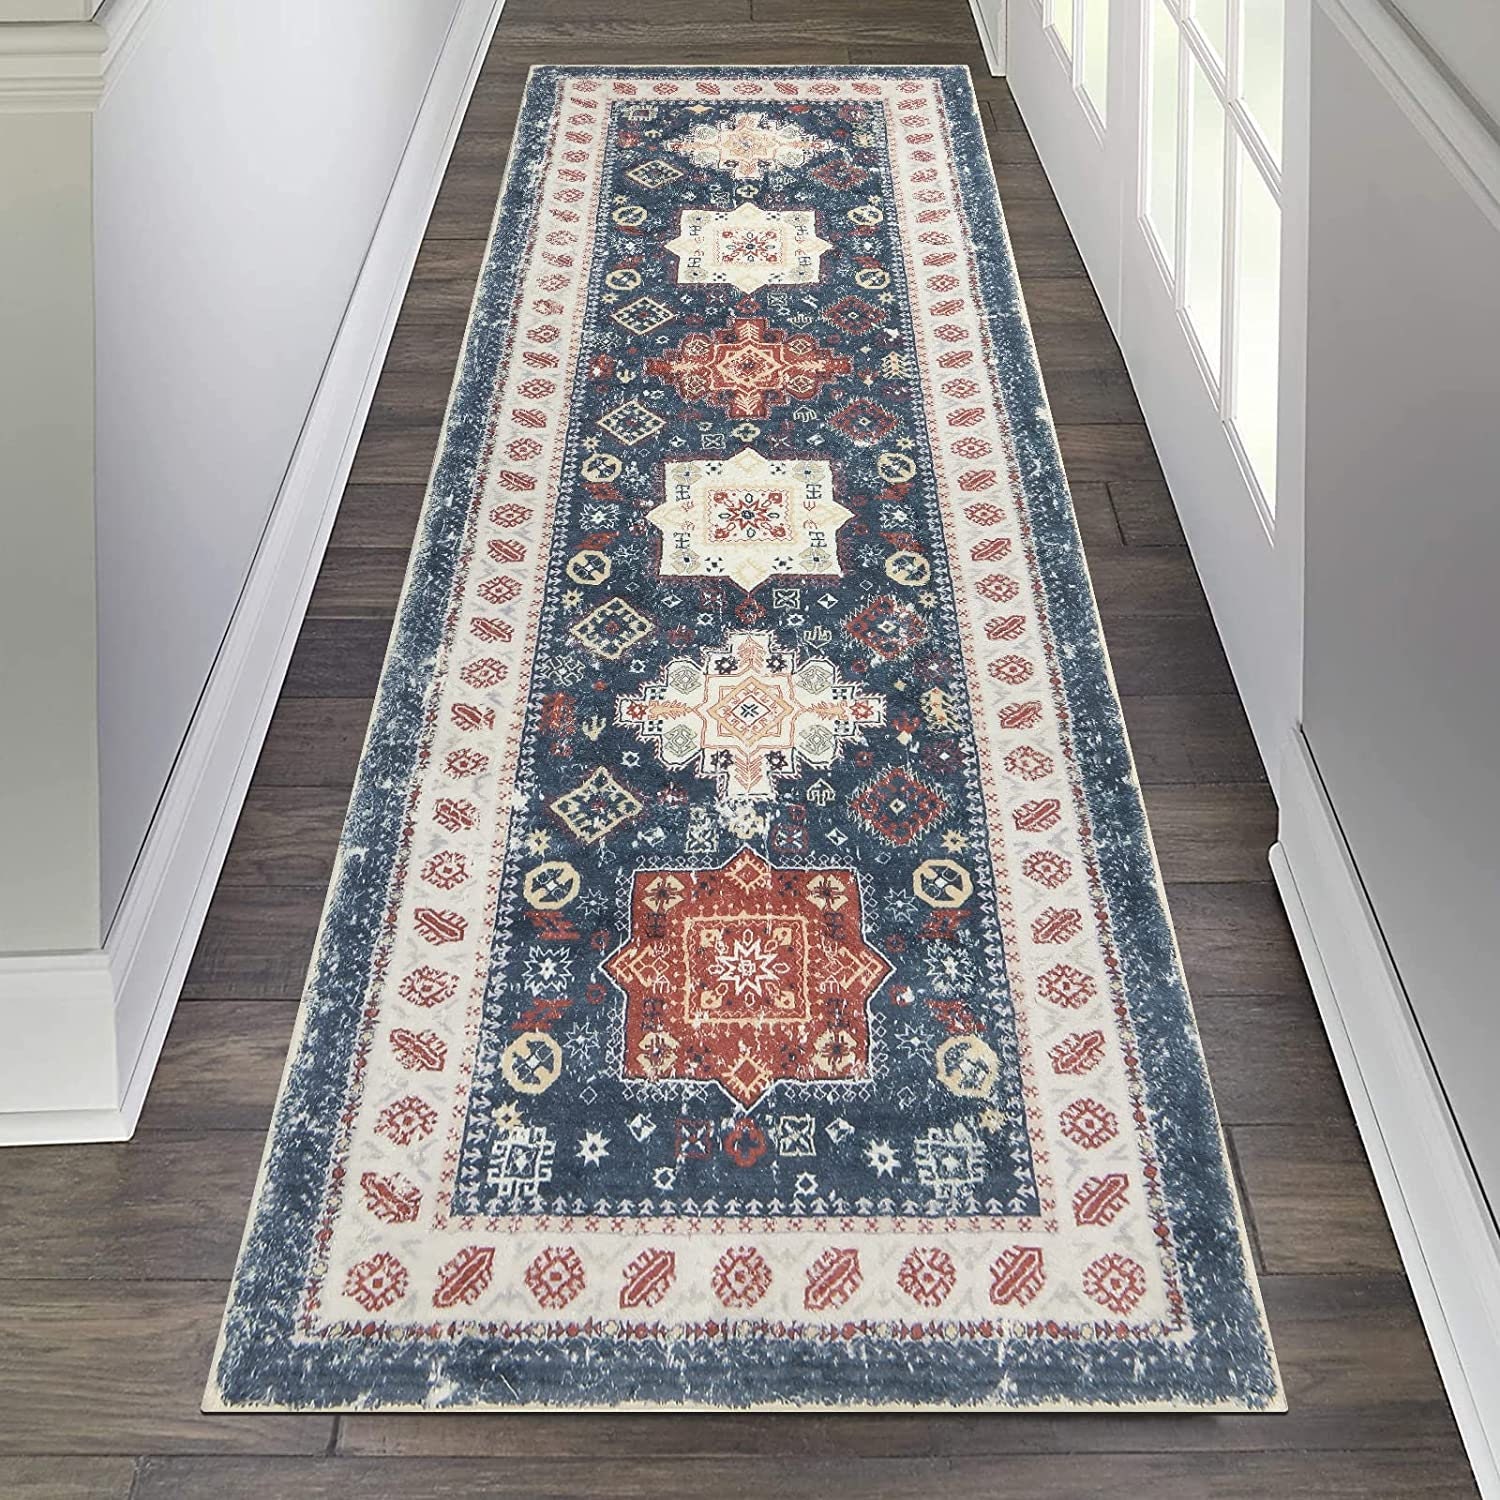 Vikakiooze Clearance,Rugs Kitchen Rug Non Skid Small Accent Throw Rugs for Entryway and Bedroom, Size: 40x120cm